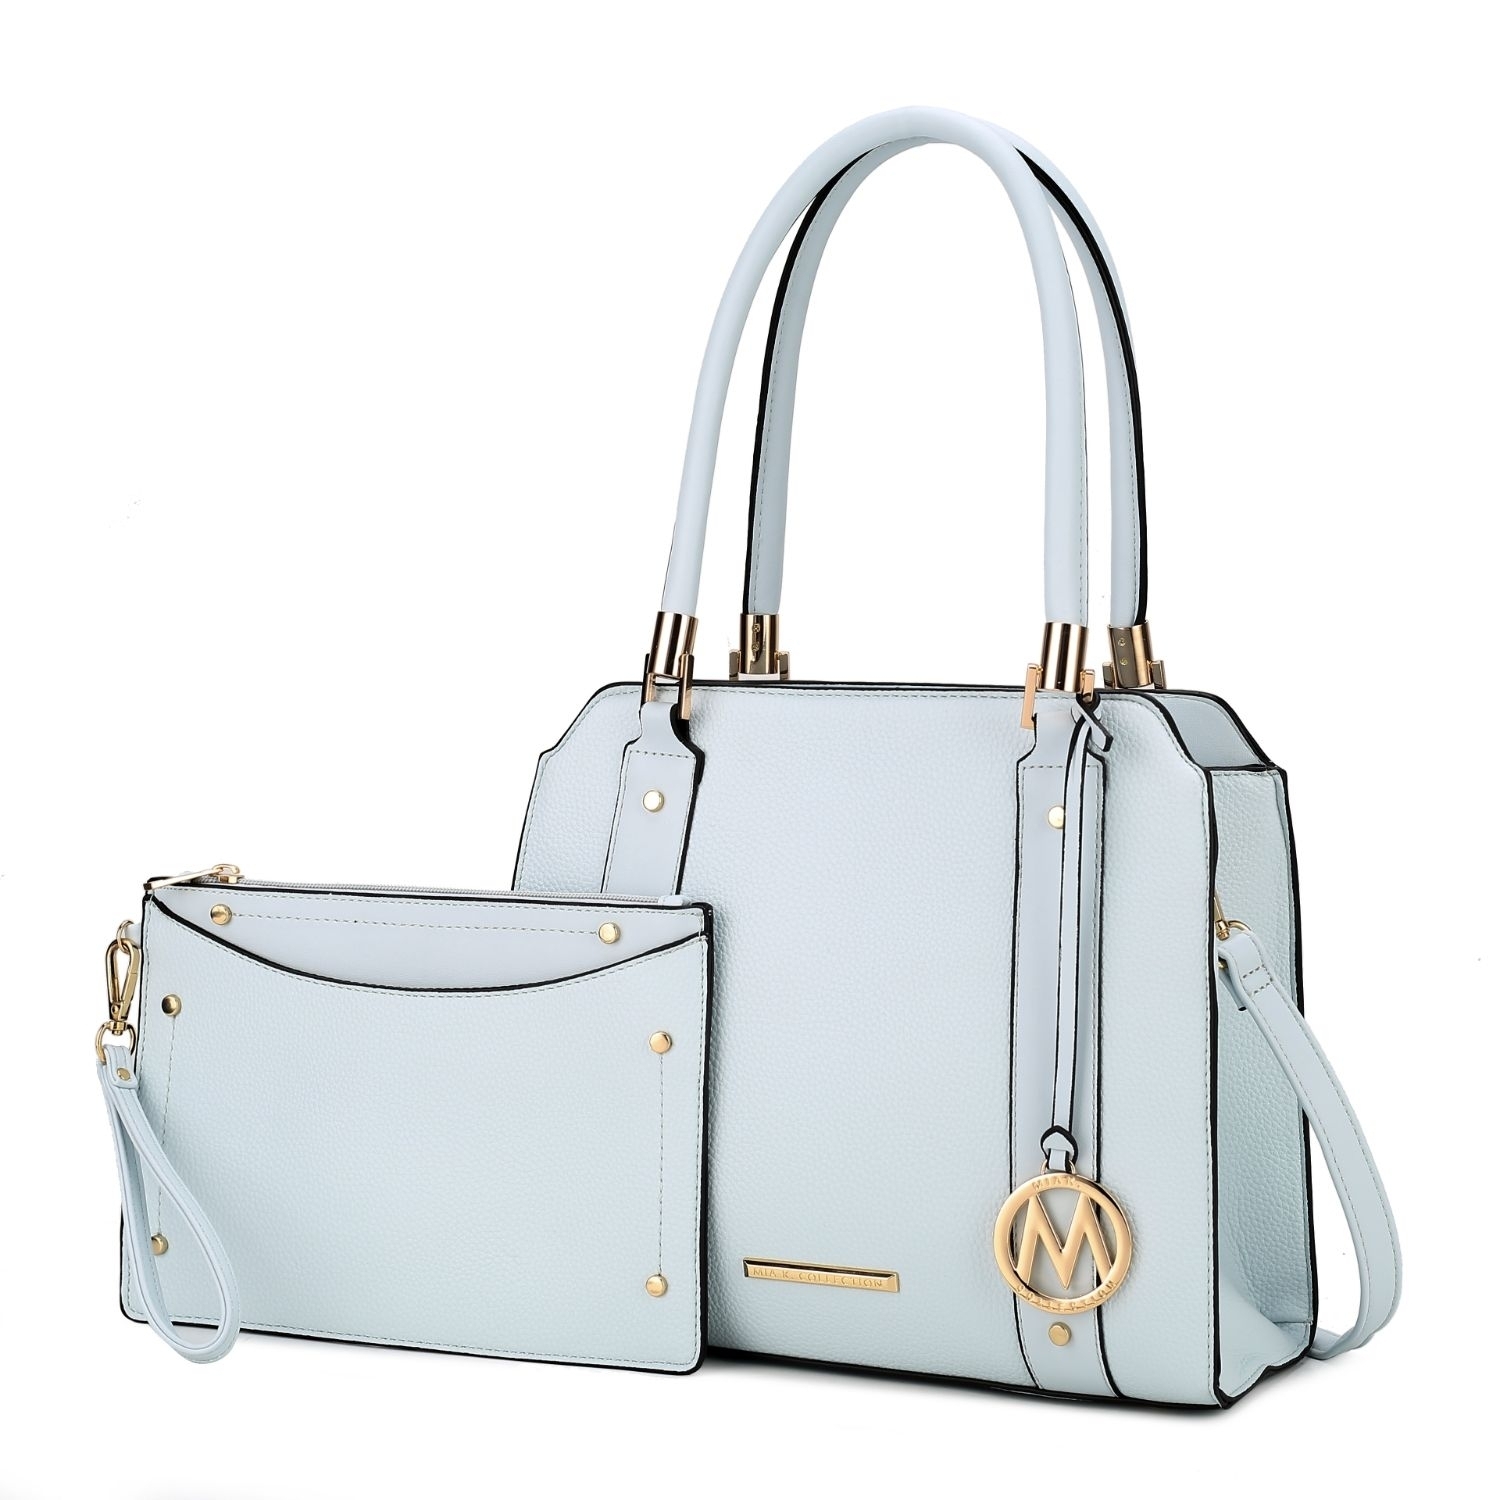 MKF Collection Norah Vegan Leather Women's Satchel Bag With Wristlet -2 Pieces By Mia K - Light Blue